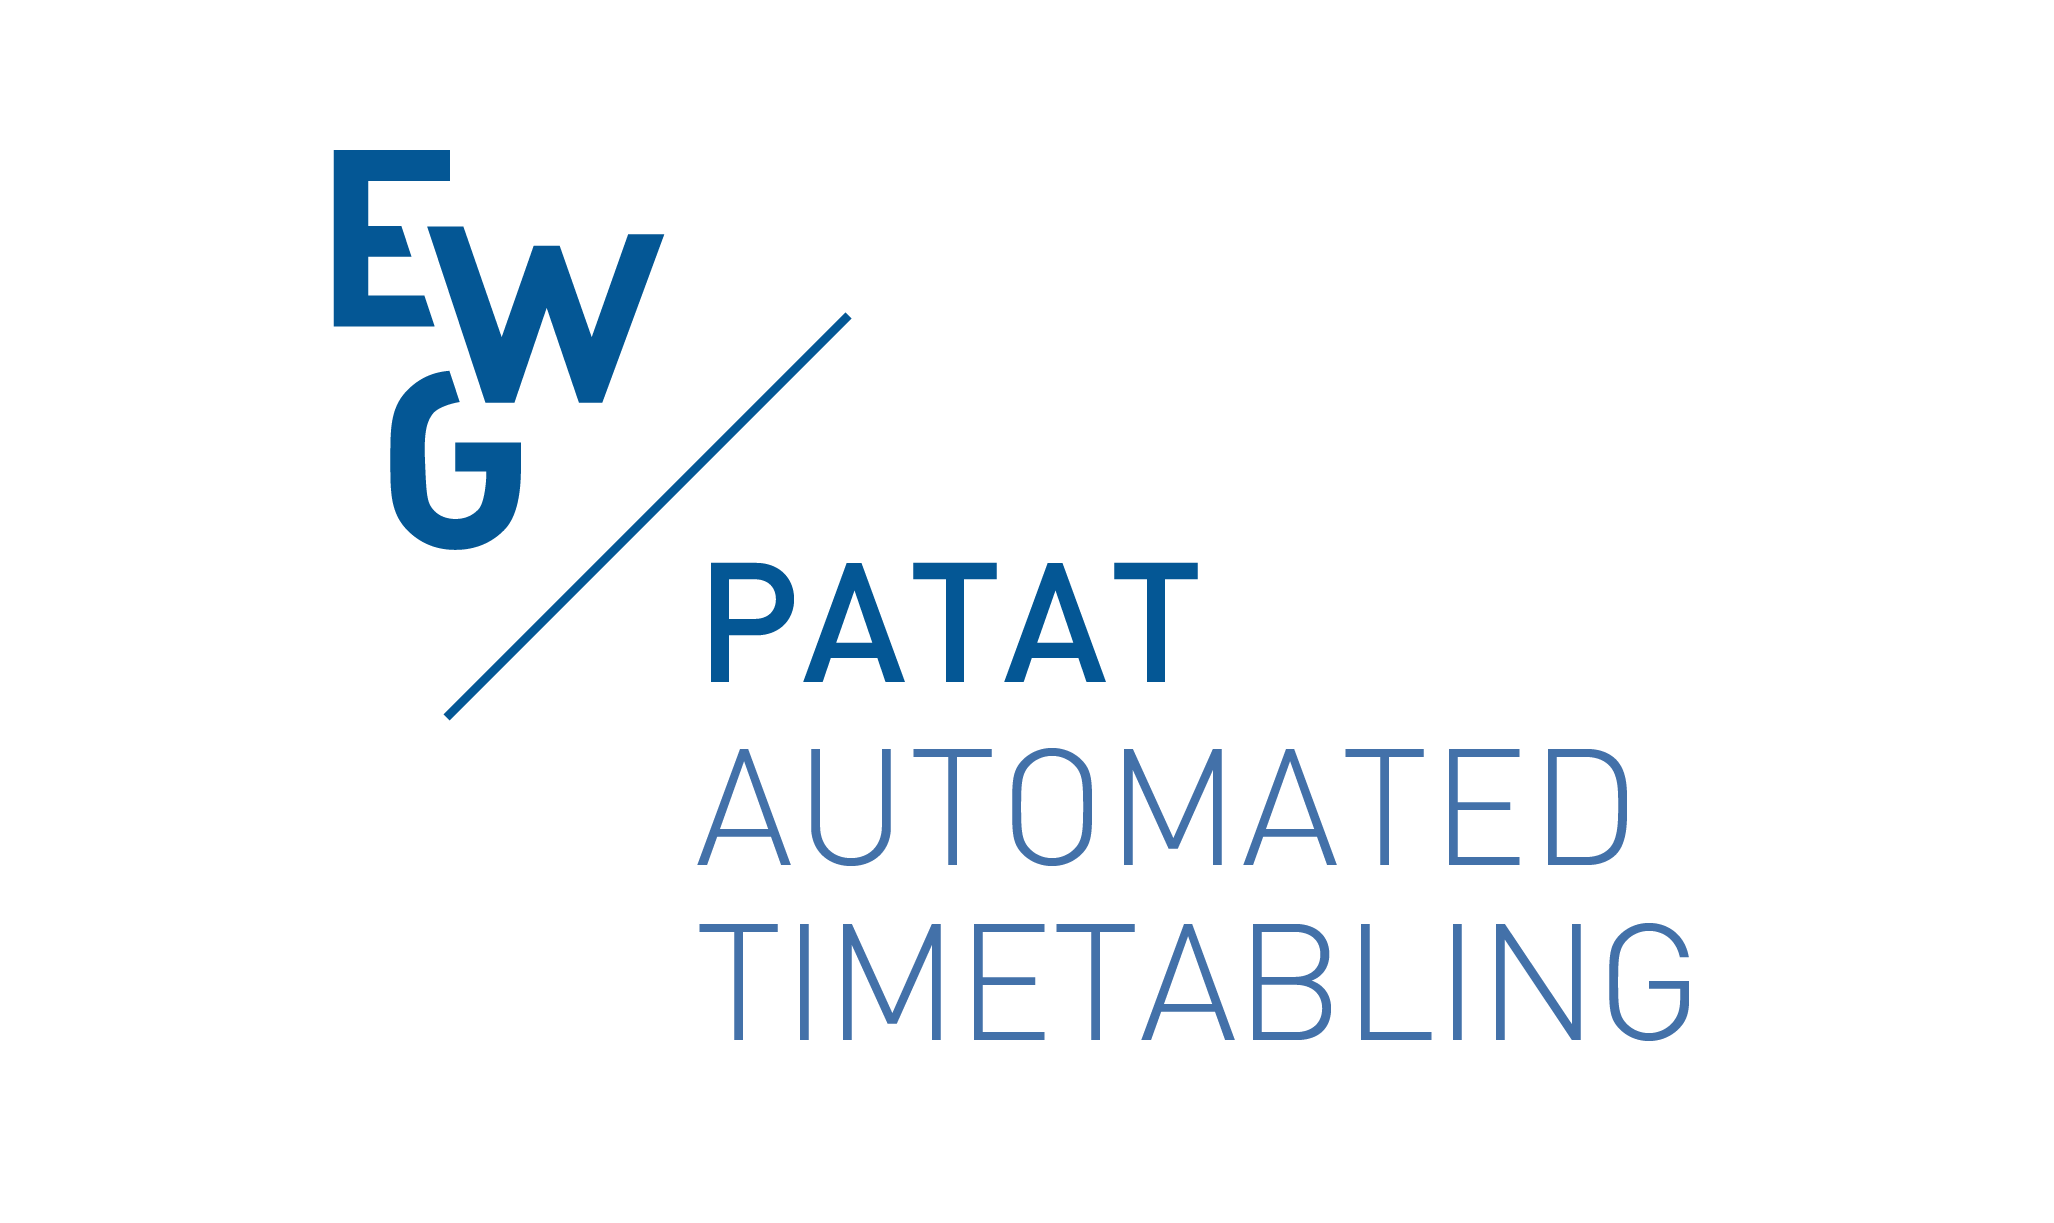 EURO working group on Automated Timetabling (PATAT)